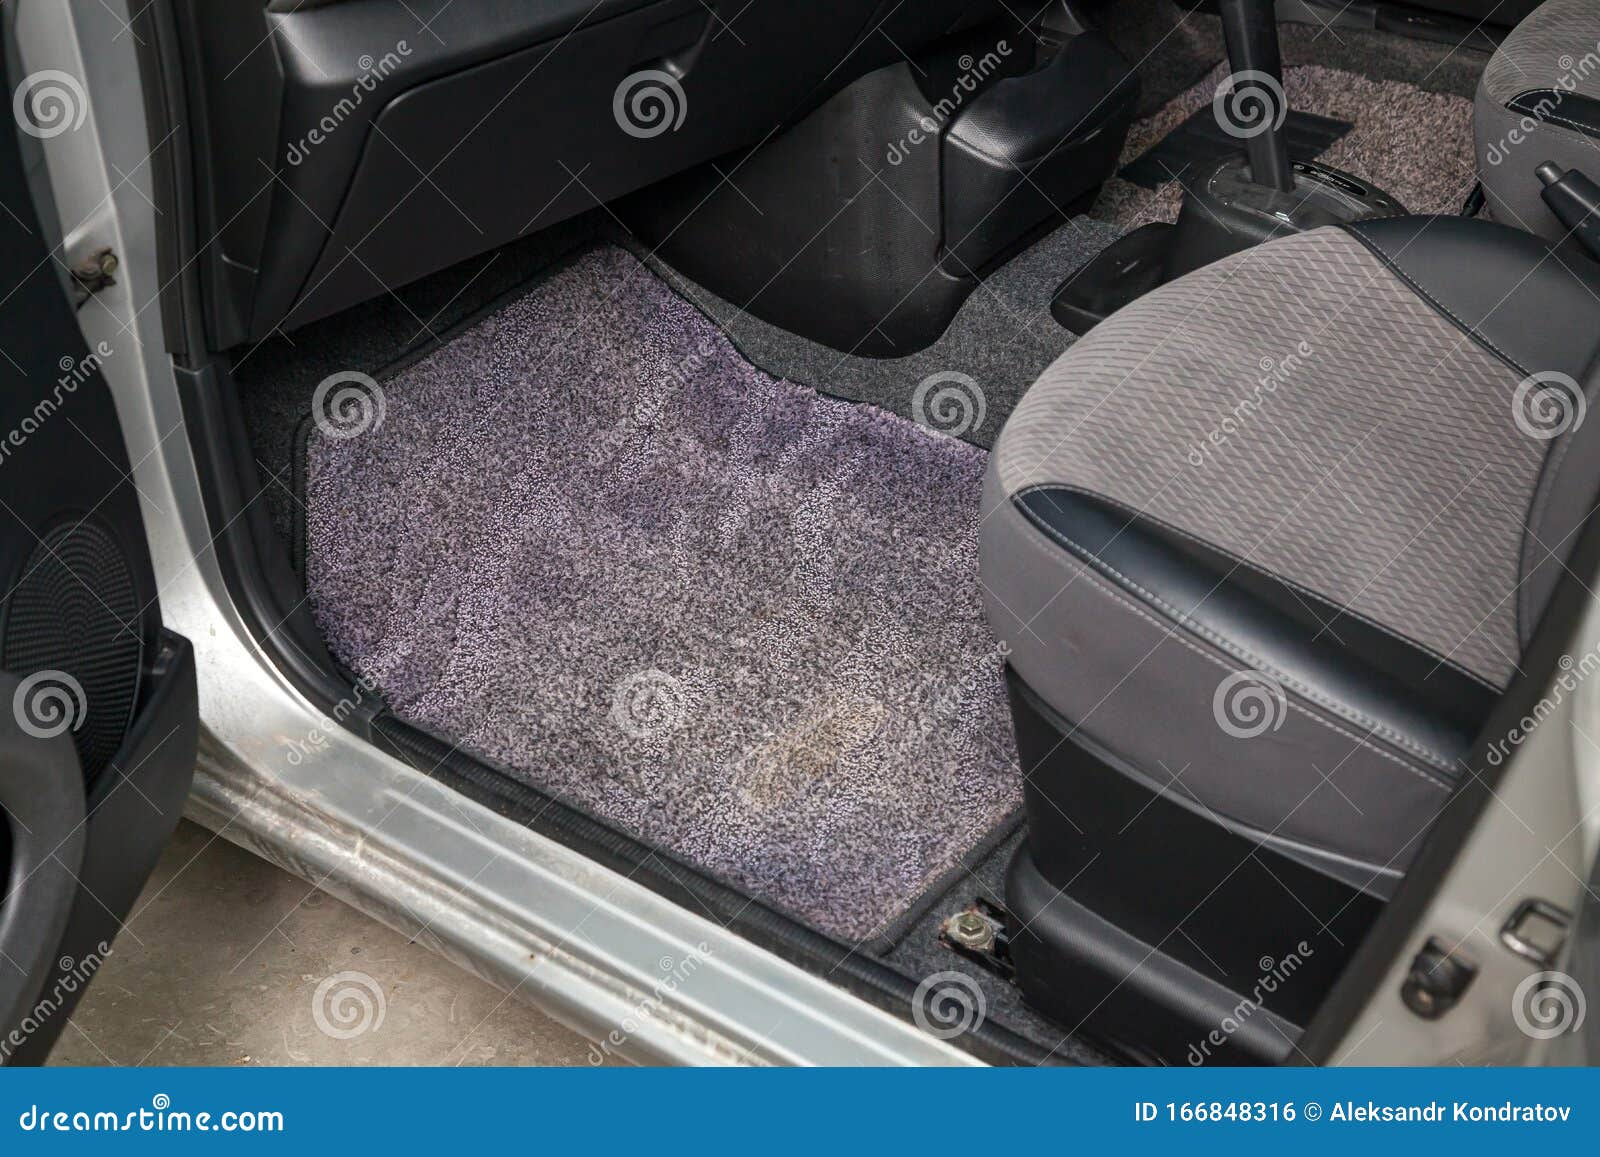 Dirty Car Floor Mats Of Gray Carpet Under Passenger Seat In The